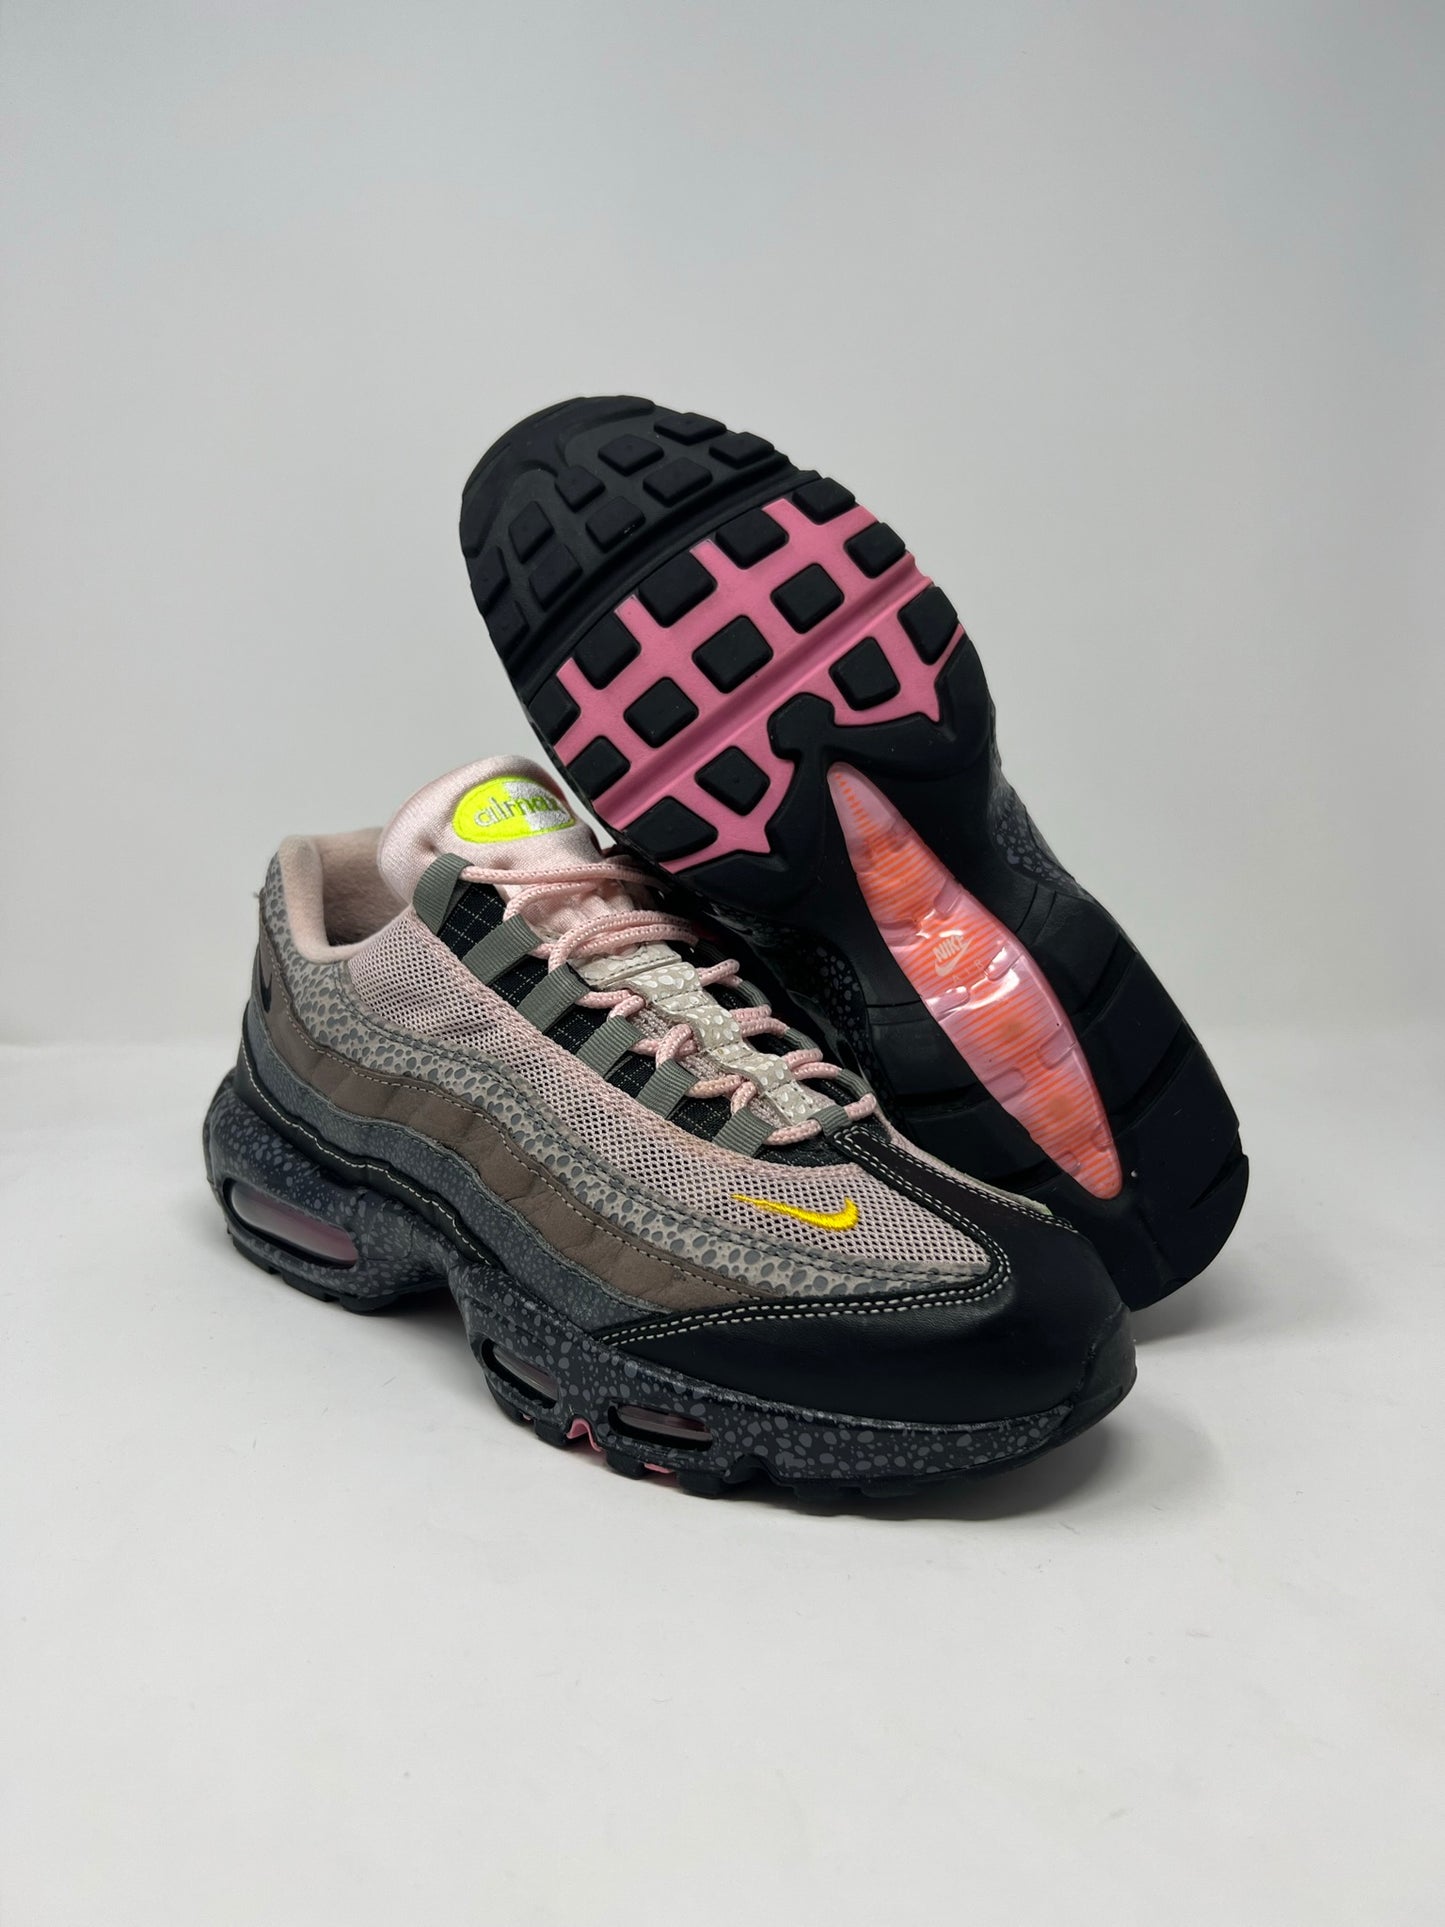 Nike Air Max 95 Size? 20 for 20 UK9